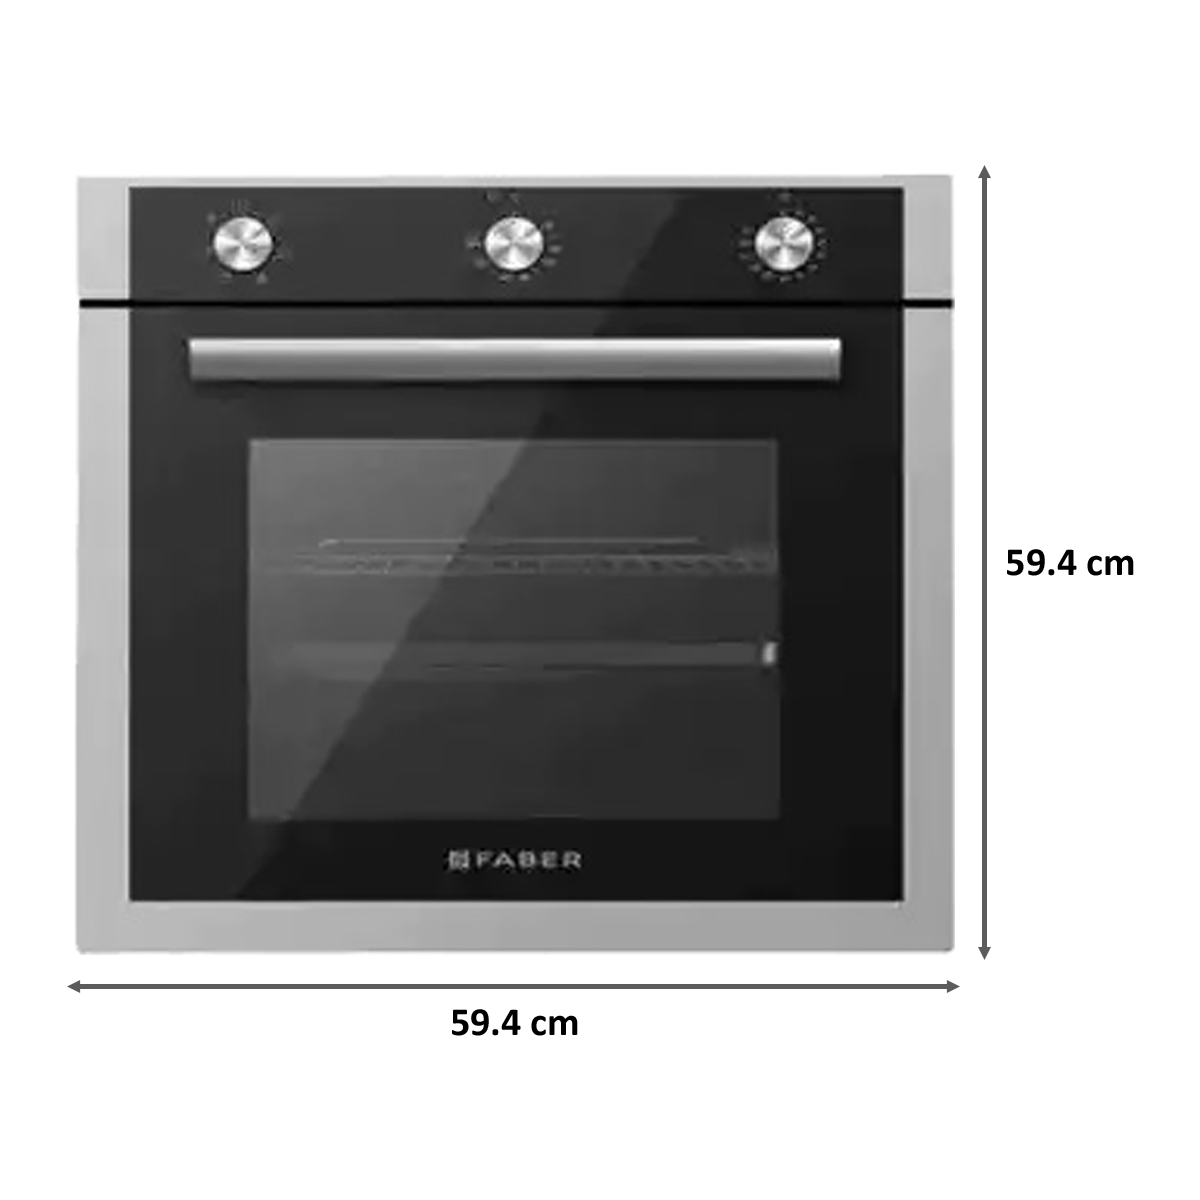 Faber 80 Litres Built-in Oven (4 Cooking Functions, FBIO 80L 4F, Black)_2